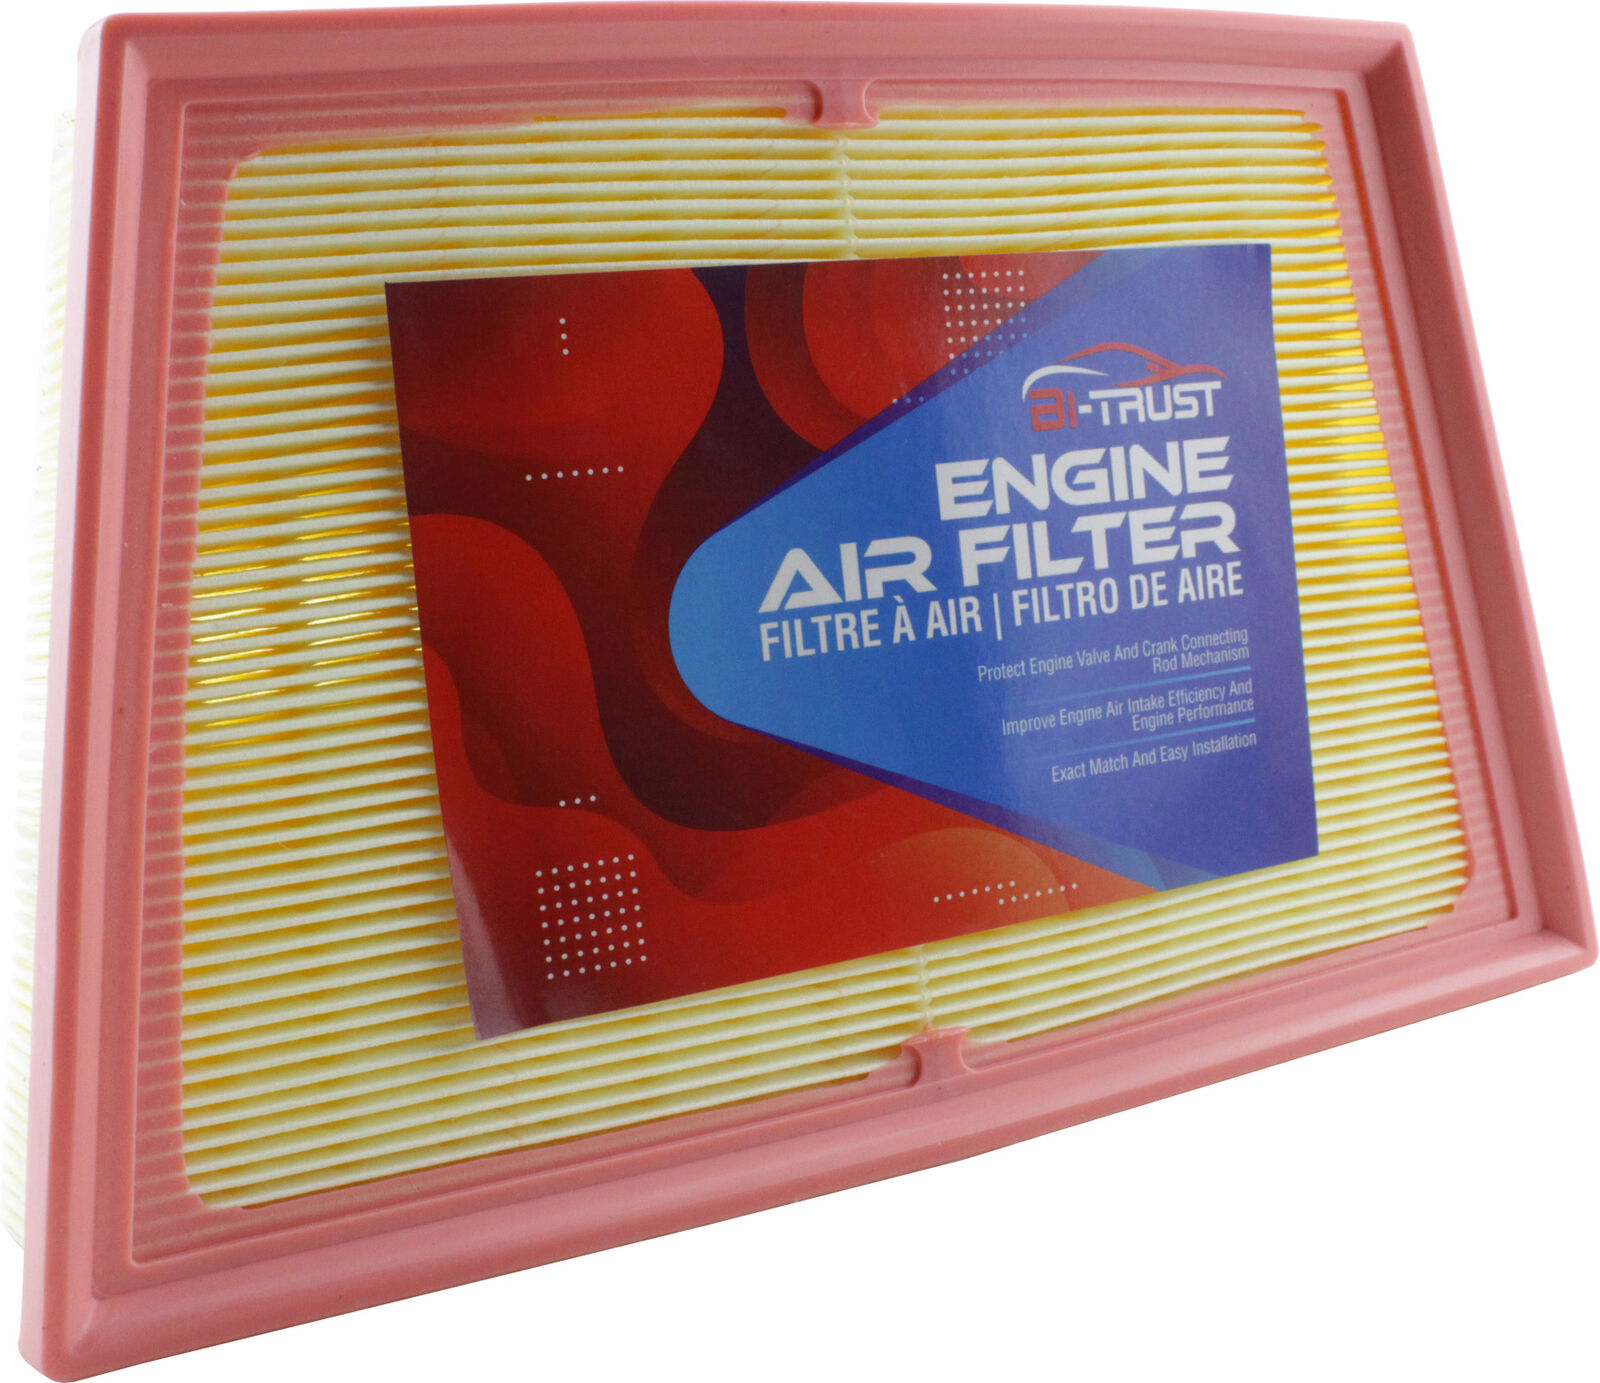 Engine Air Filter for Land Rover Range Rover Evoque Sport Discovery GJ32-9601-AA